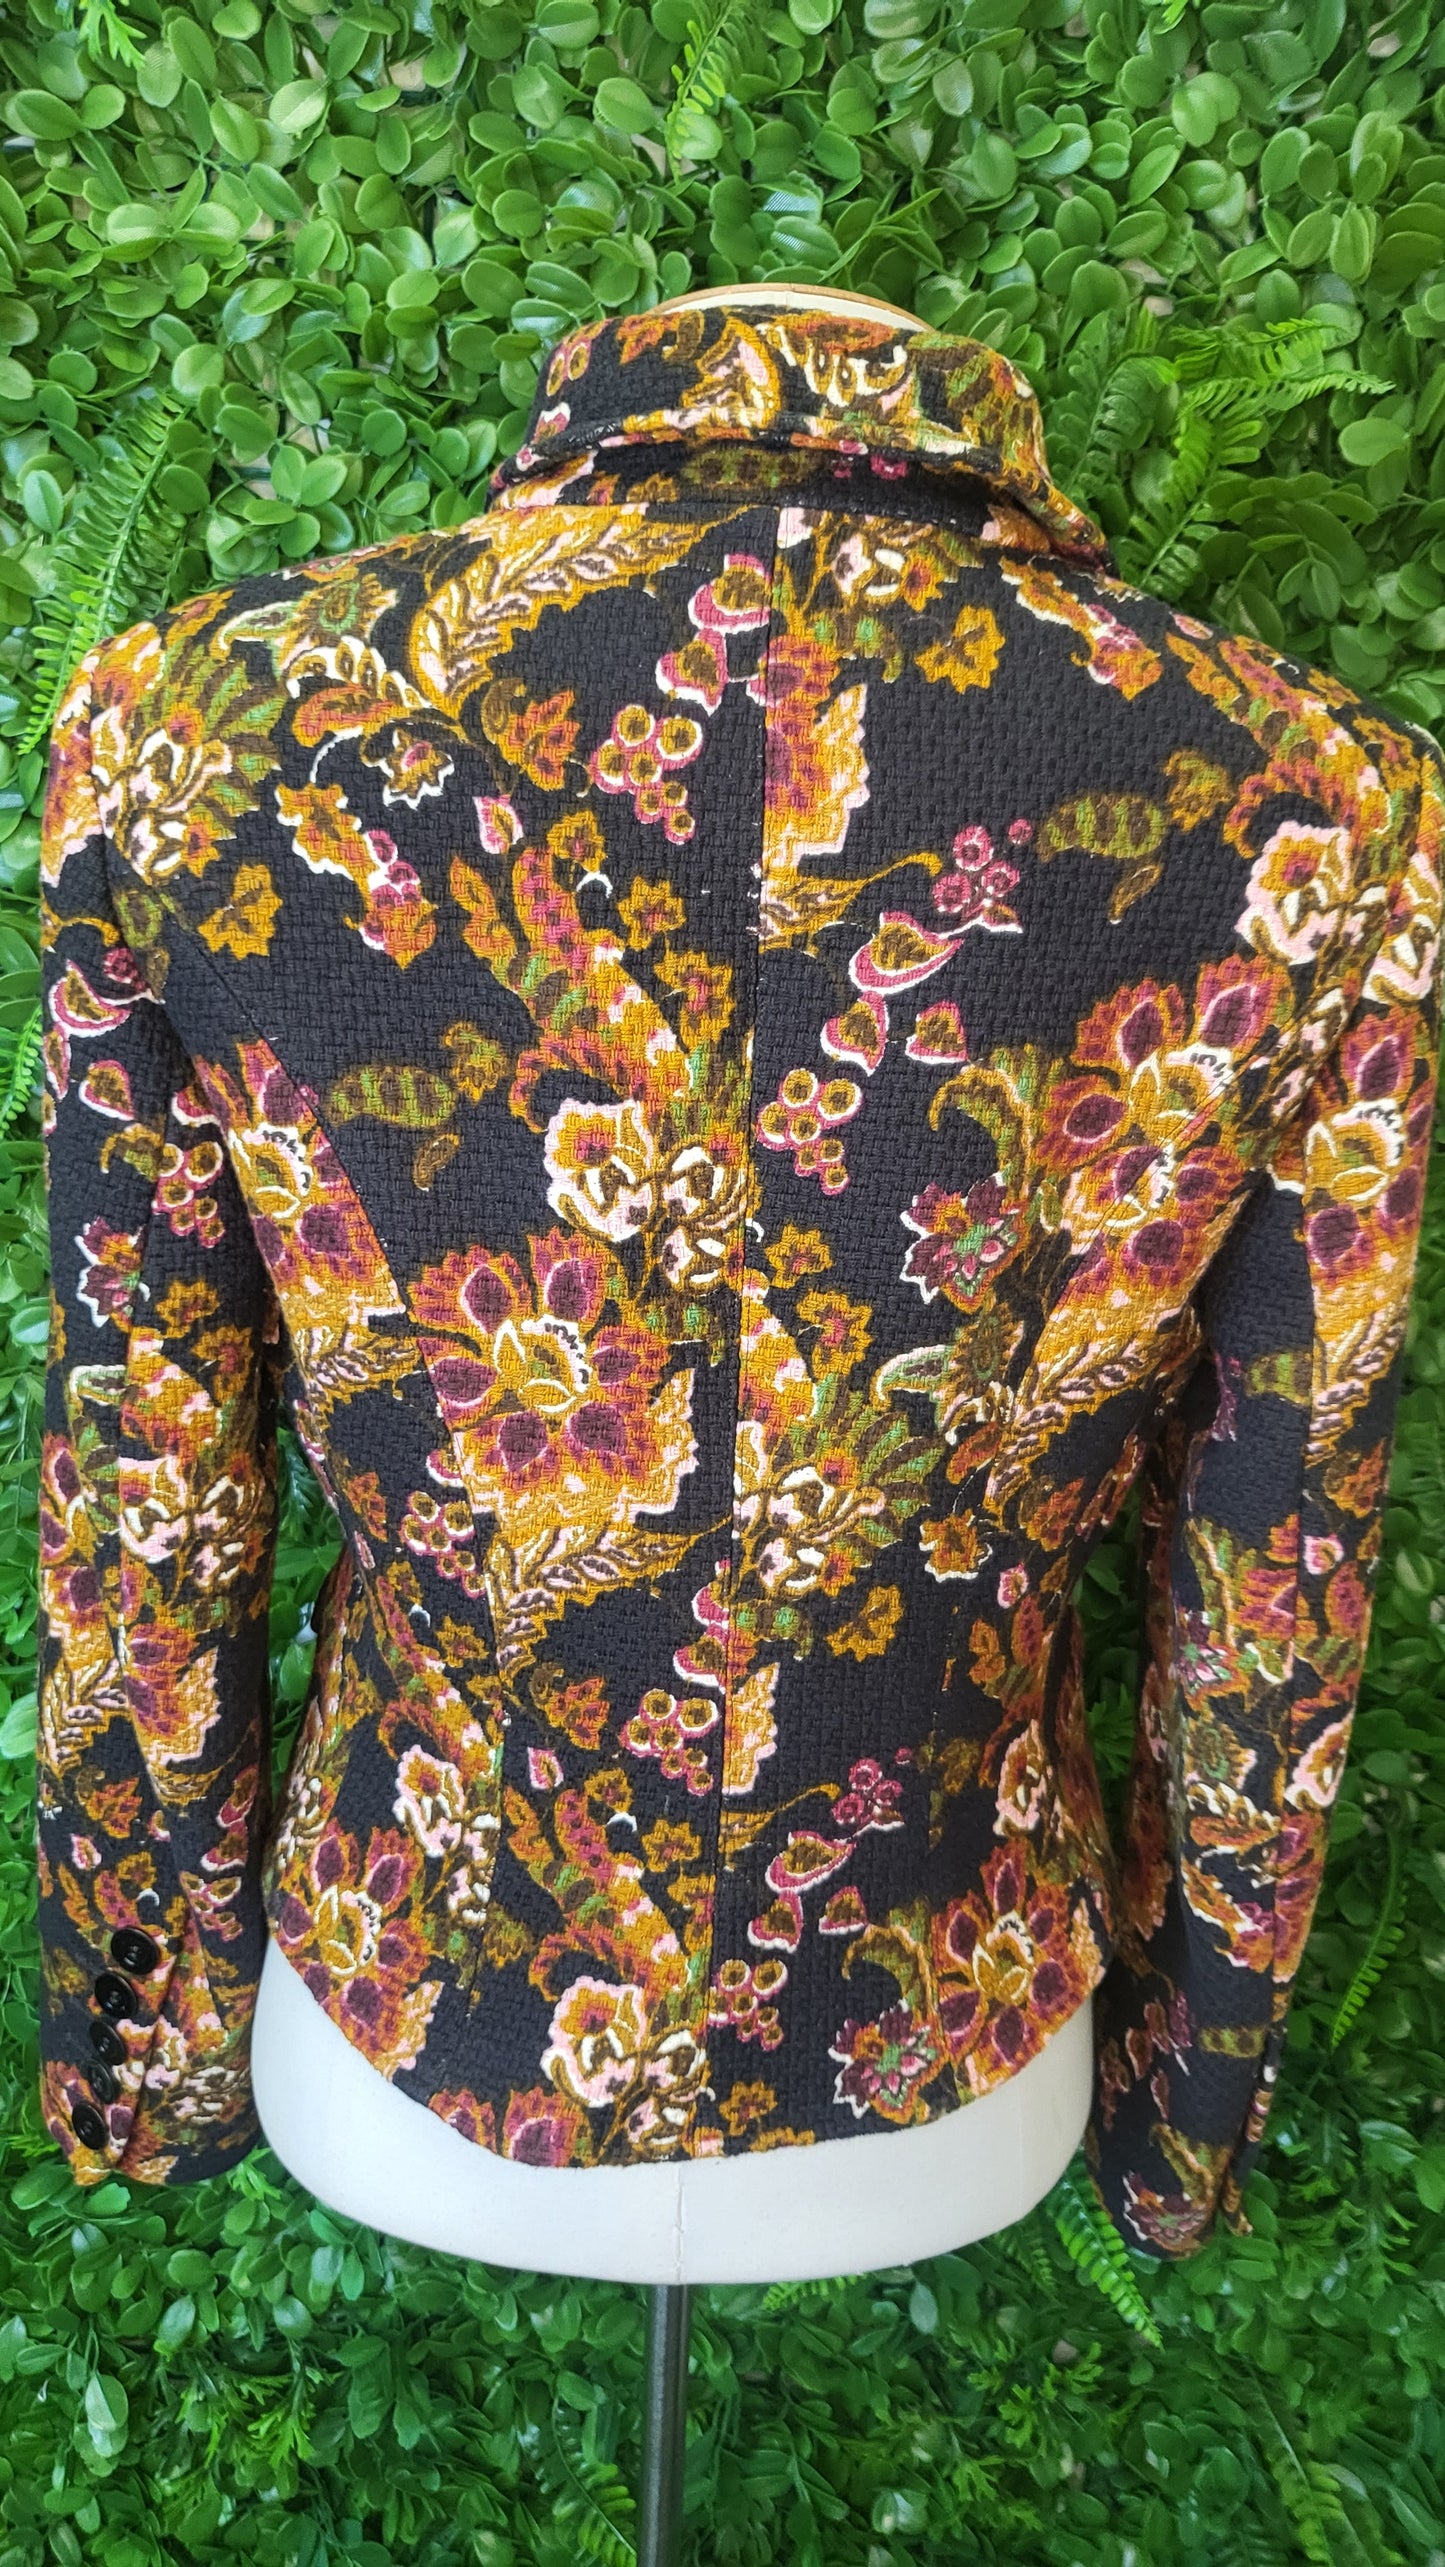 Paul Costelloe Collection  Floral Jacket (10)